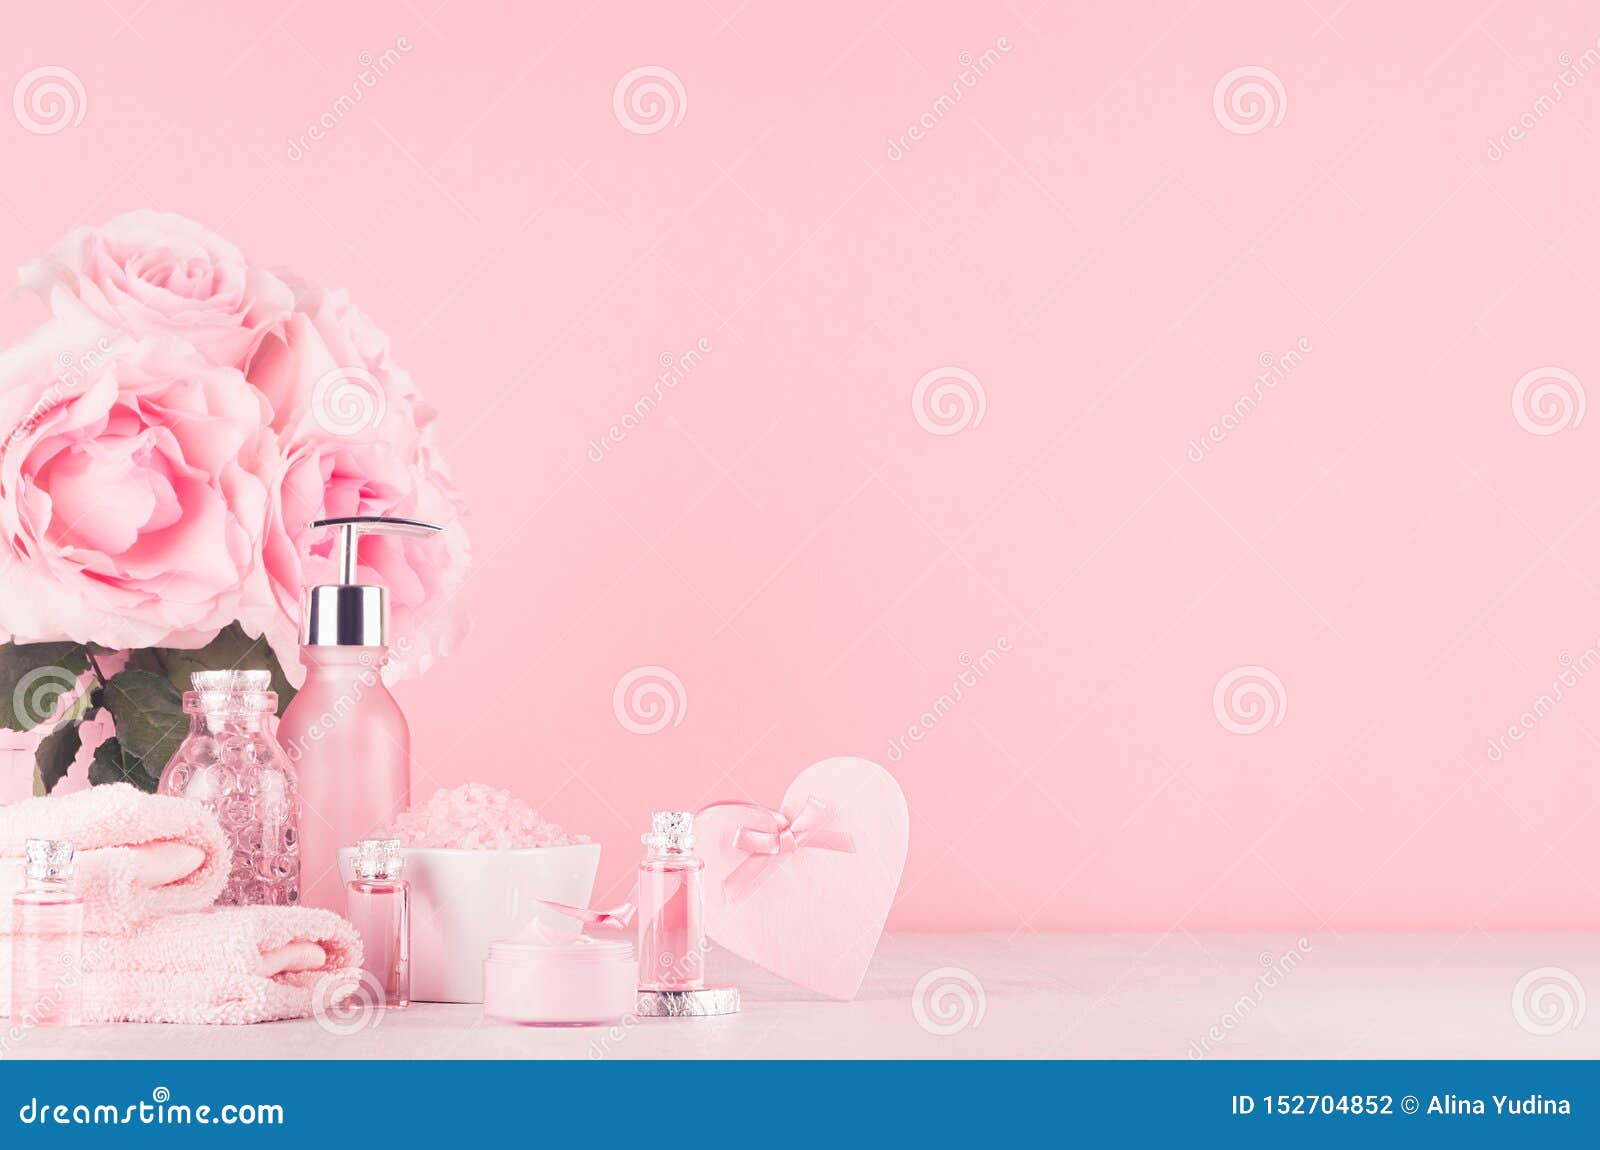 Different Skin Care Products with Romantic Roses Bouquet, Decorative Heart  on Girlish Elegant Pink Pastel Background. Stock Photo - Image of  essential, cute: 152704852